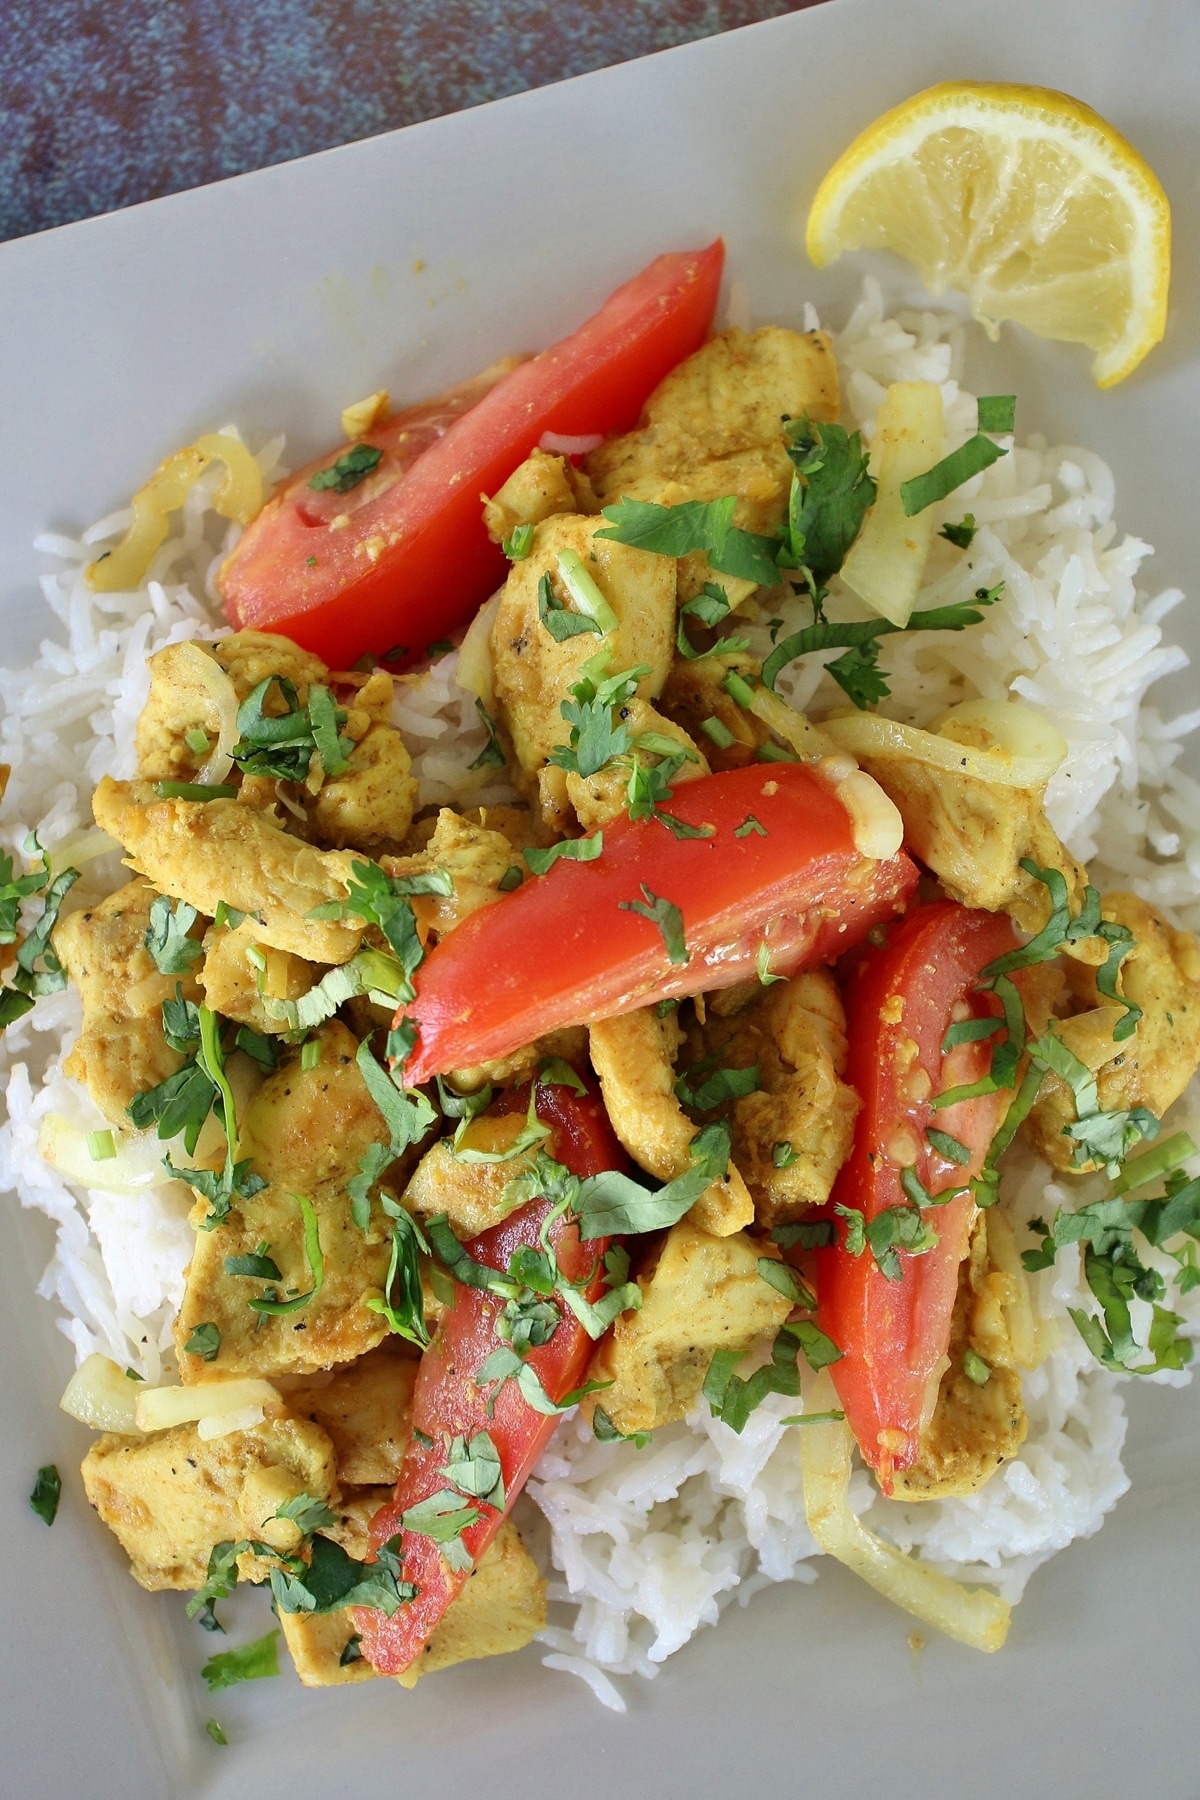 home-style chicken kebat with onions, tomatoes, and cilantro, served over rice on a square plate